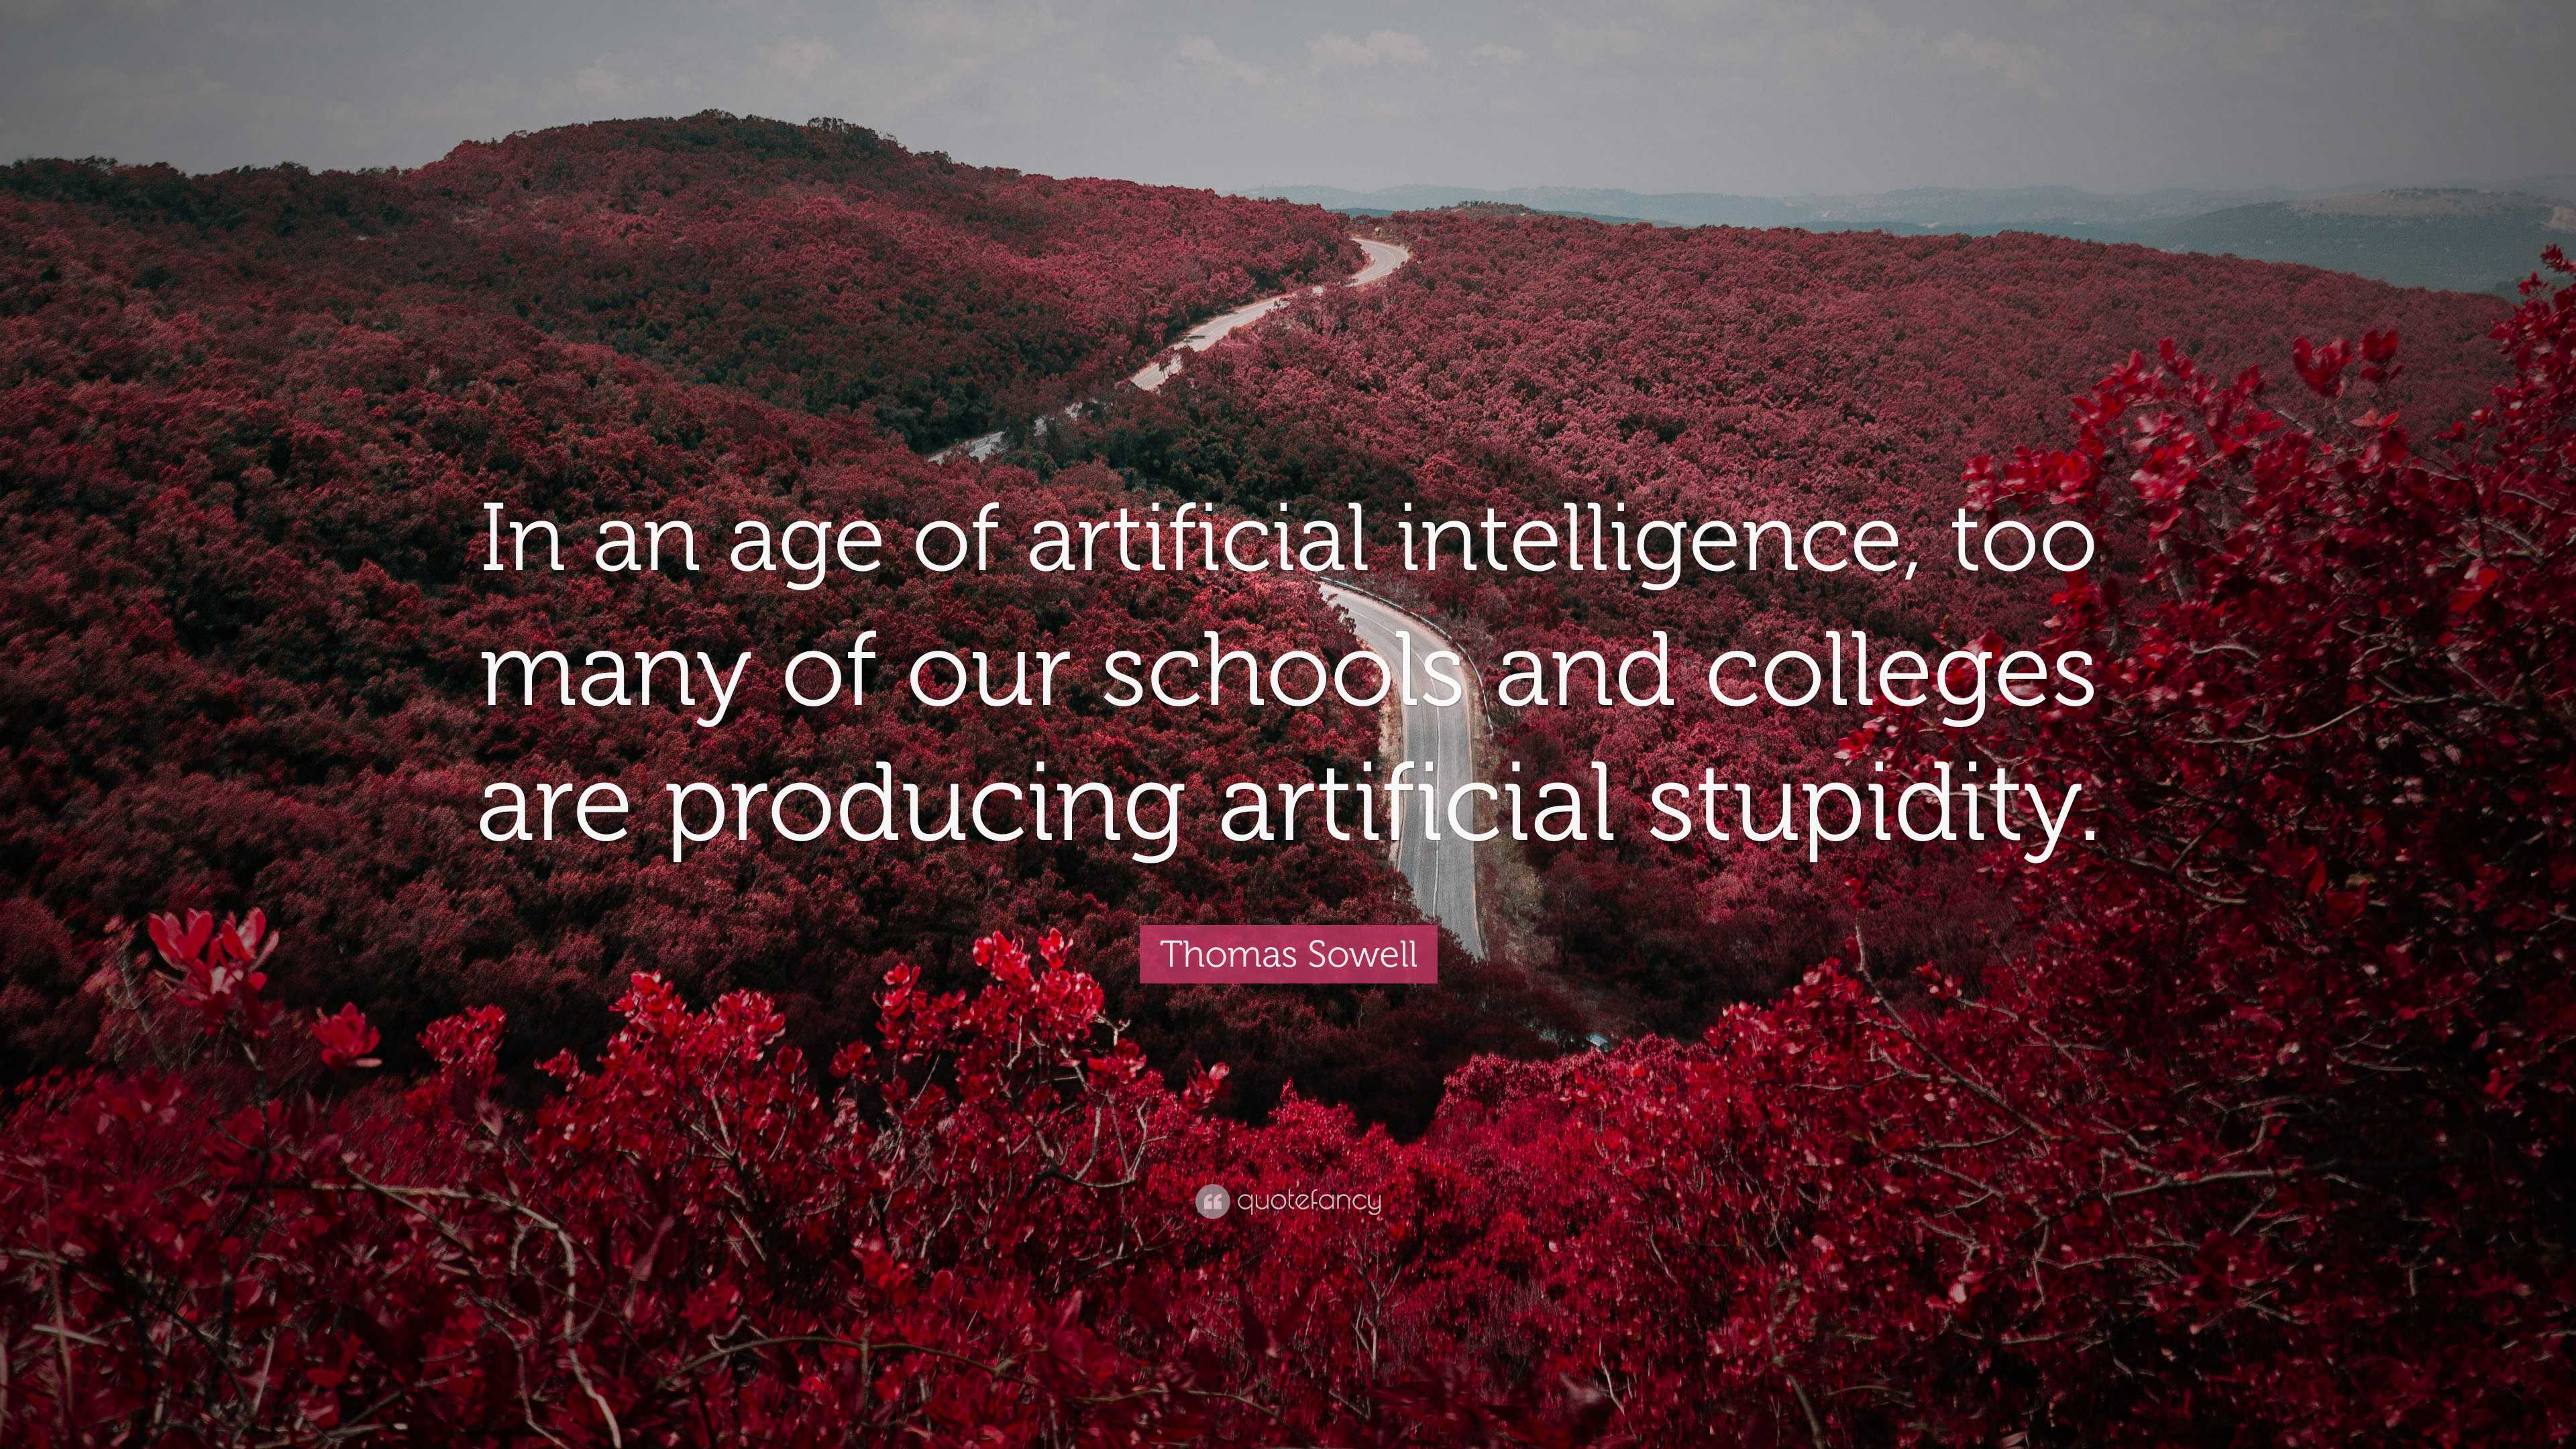 Thomas Sowell Quote: “In an age of artificial intelligence, too many of ...